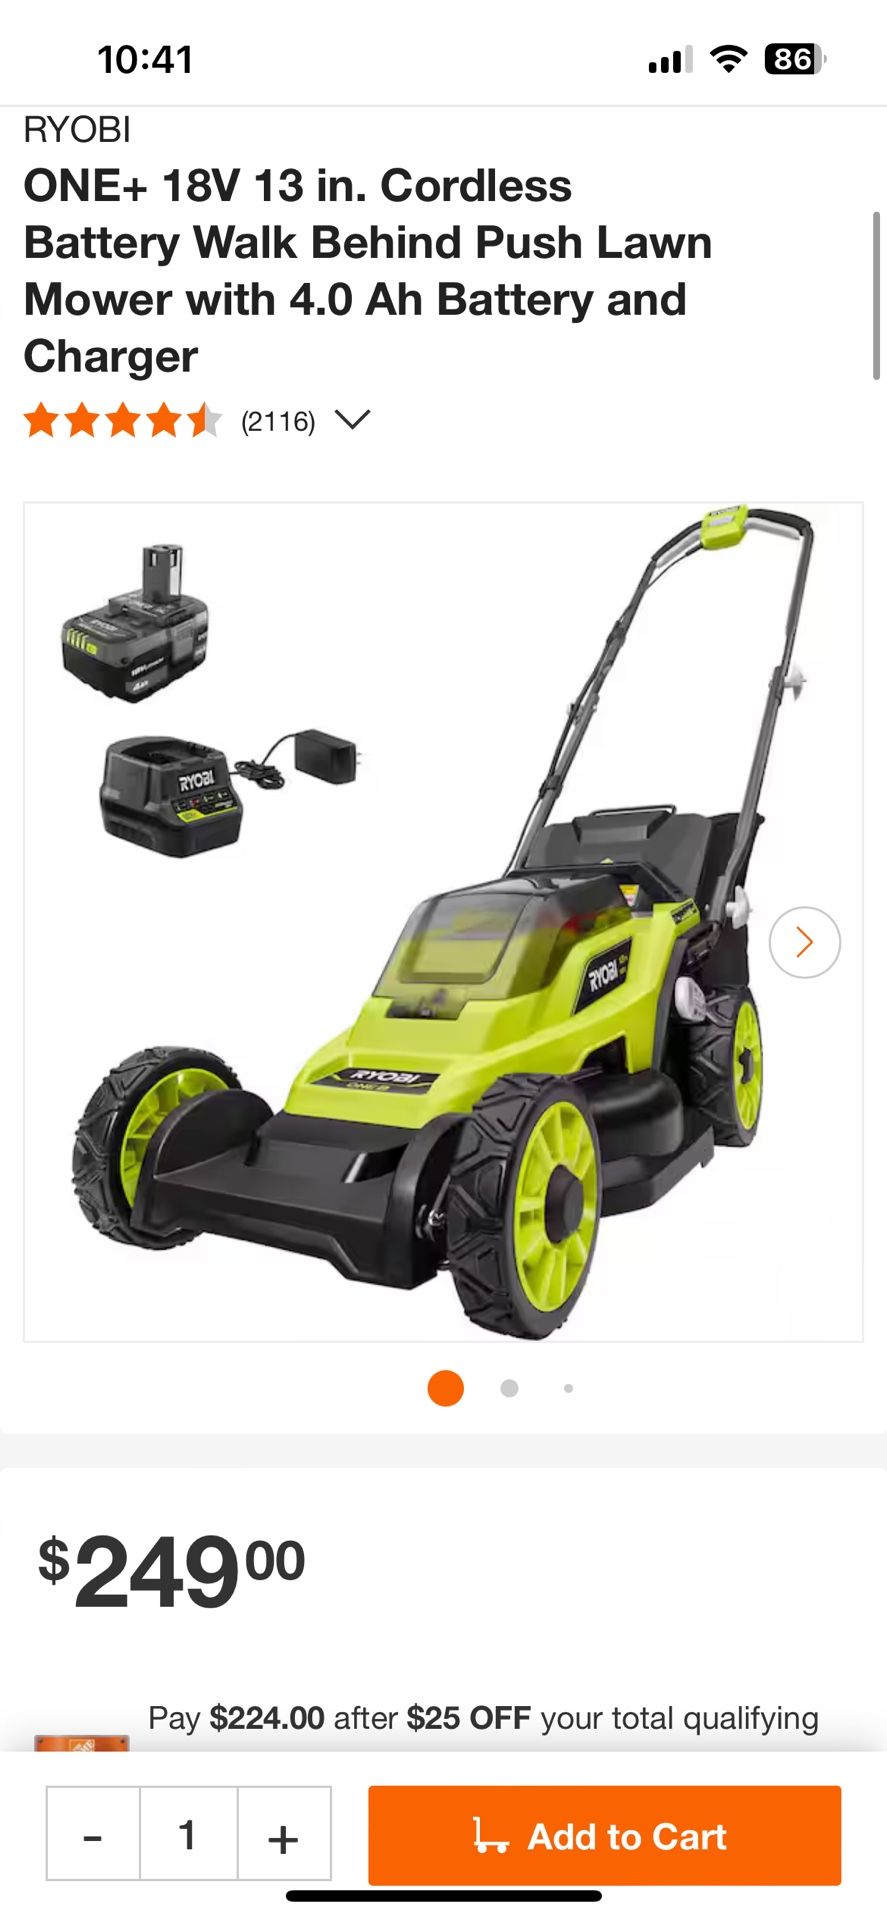 RYOBI 18V 13 In. Cordless Battery Walk Behind Push Lawn Mower With Battery And Charger $200